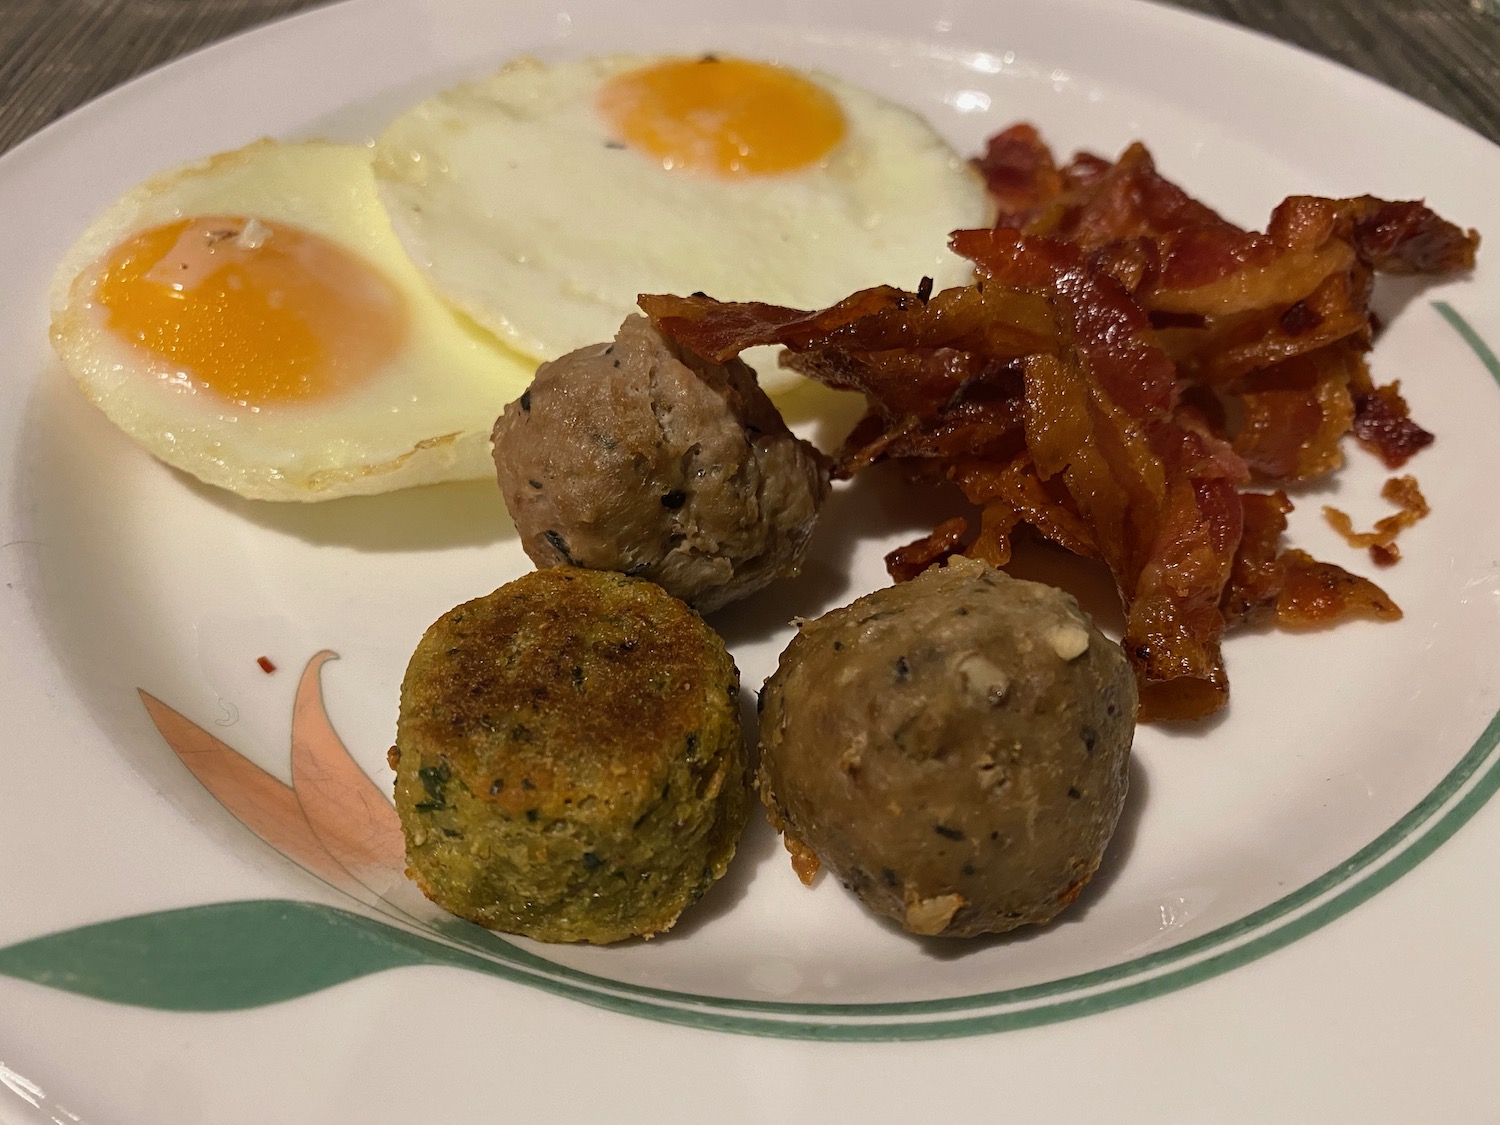 a plate of food with eggs bacon and meatballs